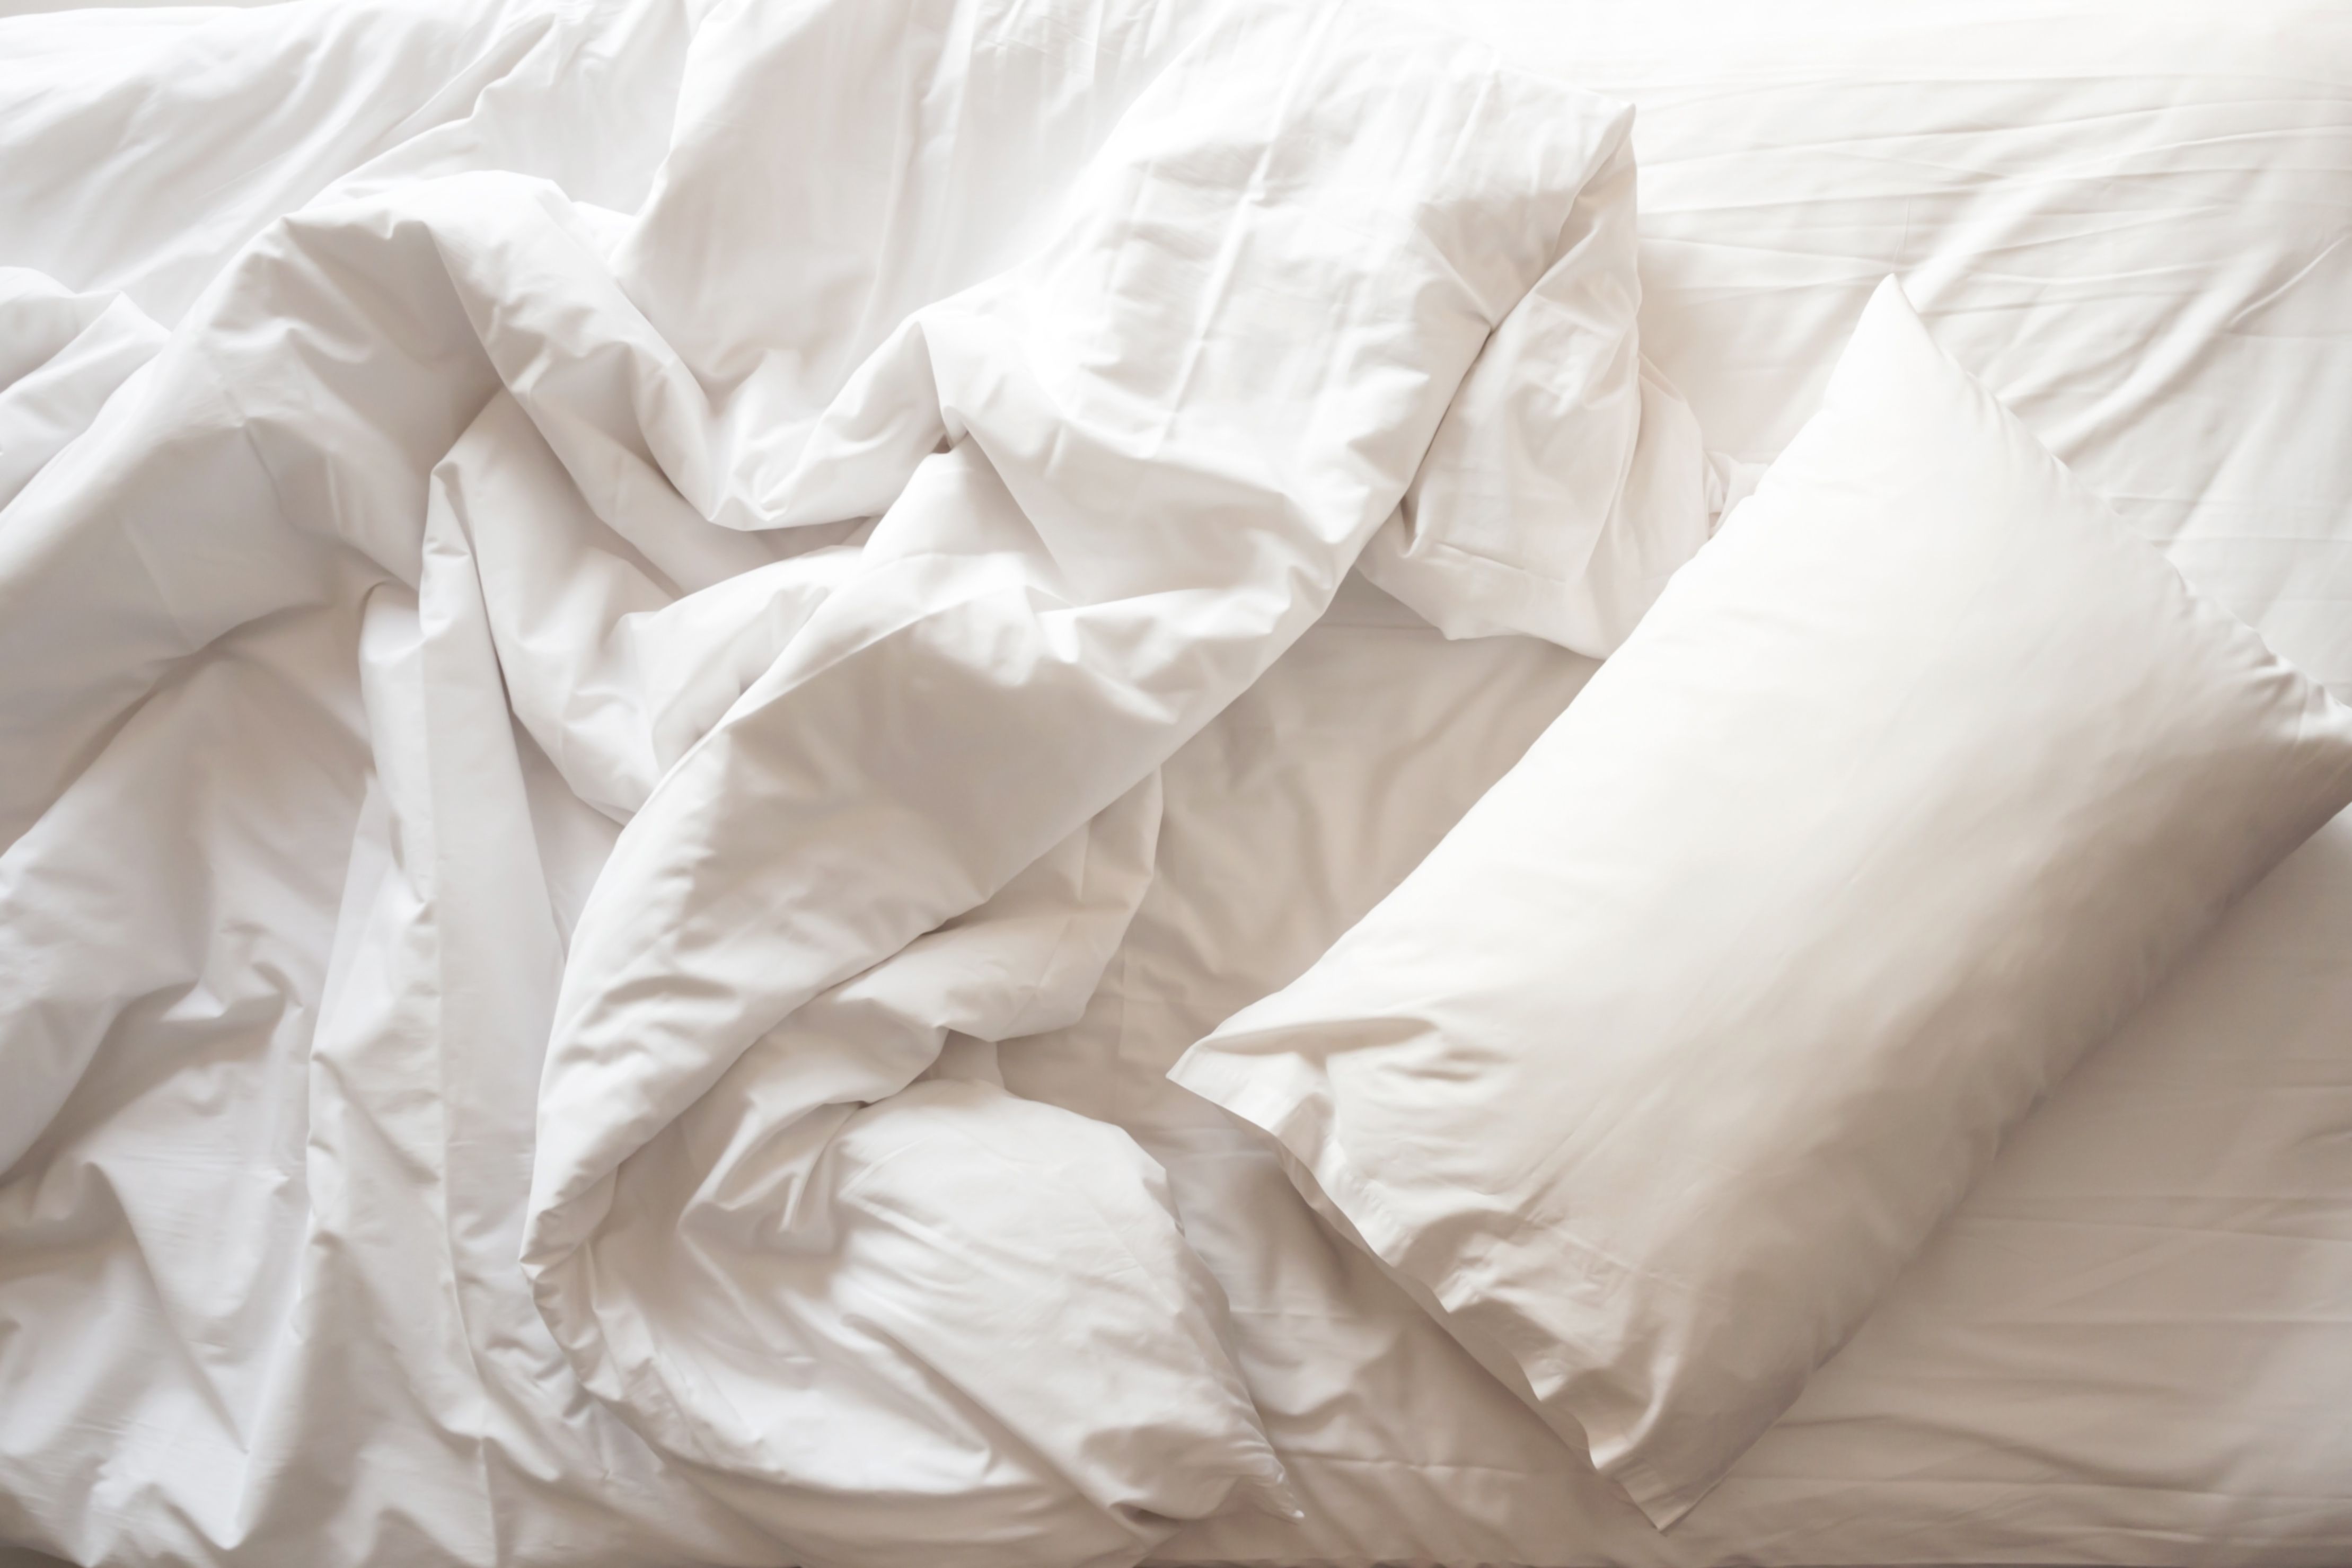 https://hips.hearstapps.com/hmg-prod/images/messy-bed-white-pillow-with-blanket-on-bed-unmade-royalty-free-image-1689186089.jpg